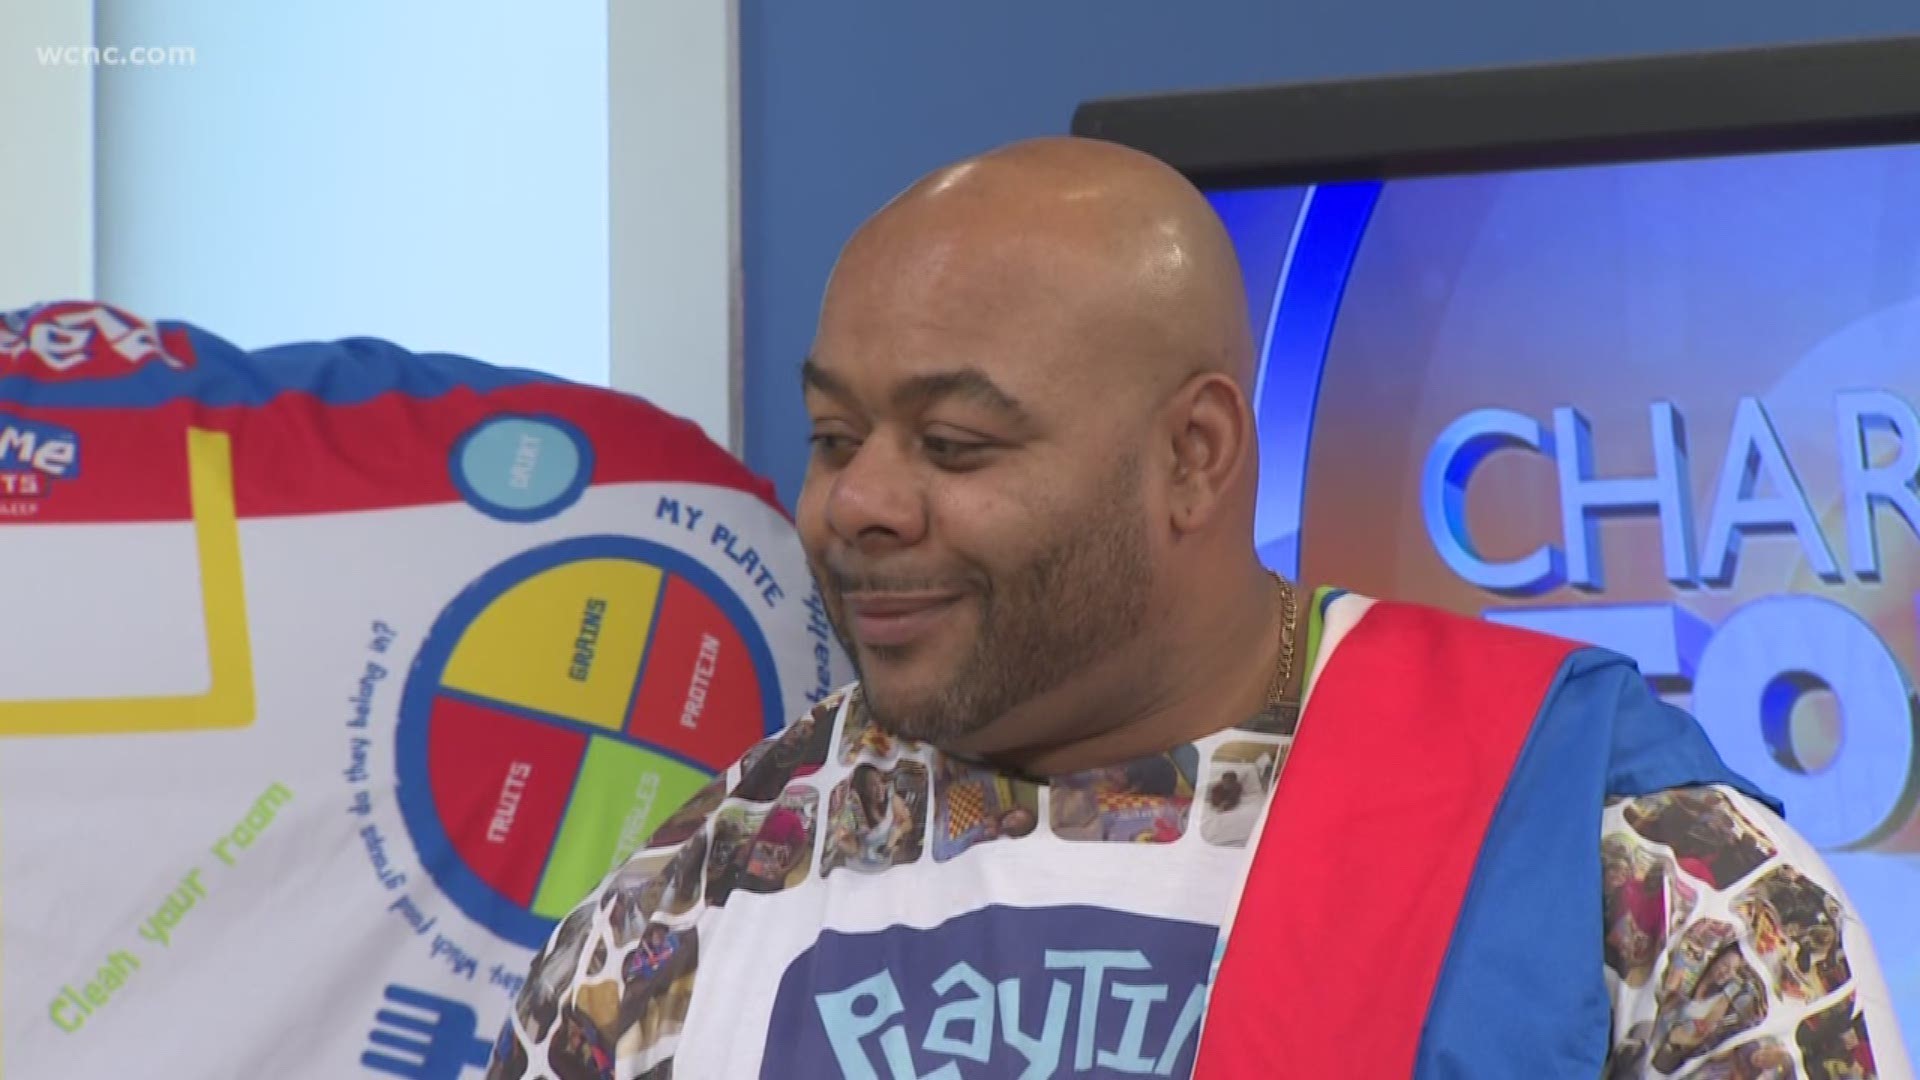 A local man, Kevin Gatlin, creates sheets, mattresses and sleeping bags for hospitalized children. The best part? They are colorful and have games on them. Here’s the story behind his company, Play Time Bed Sheets.